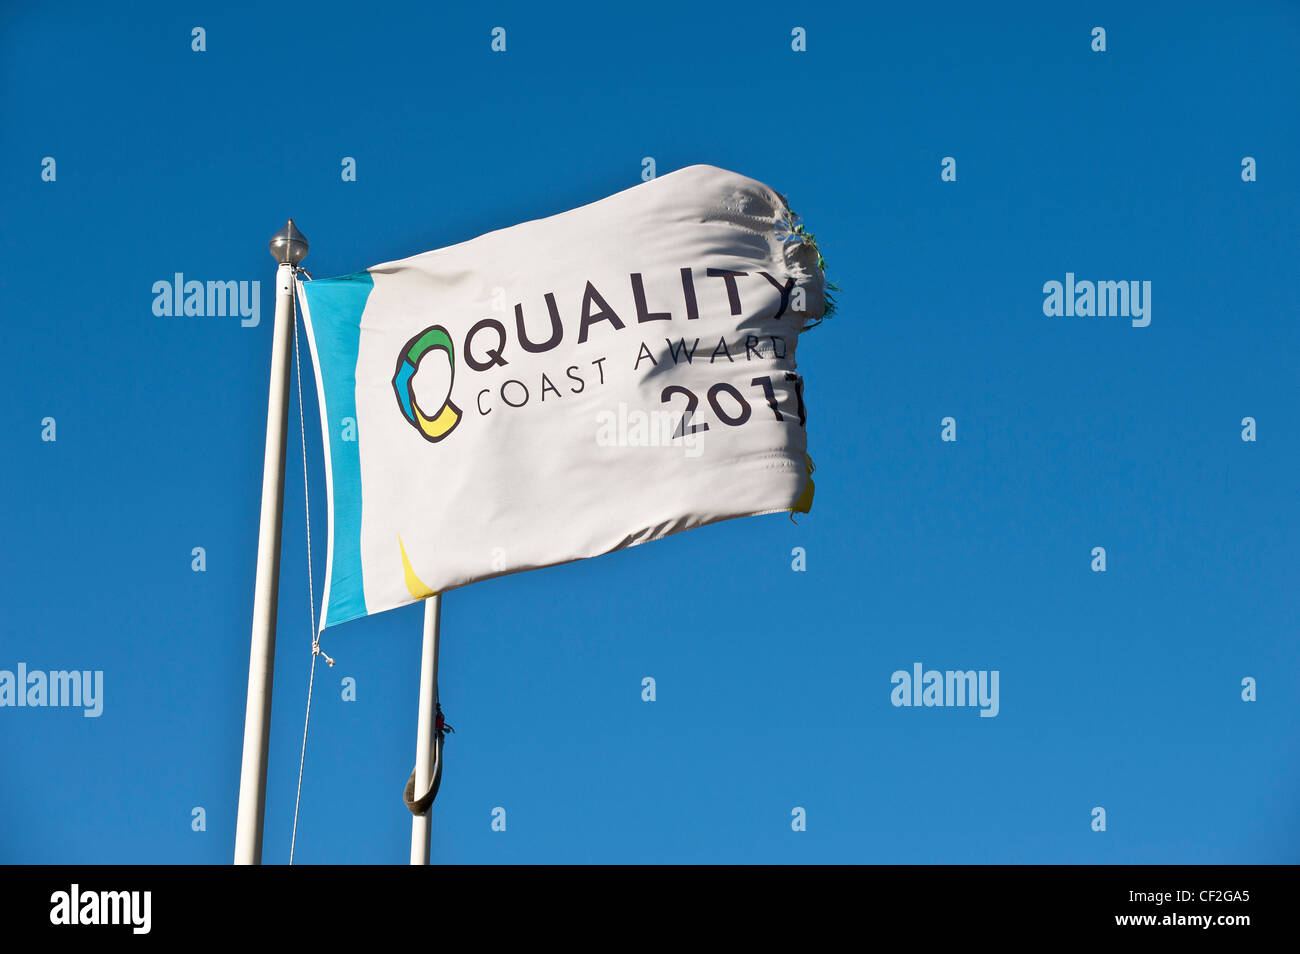 A Quality Coast Award flag in Southend on Sea symbolising that the beach is one of the best in Britain. Stock Photo